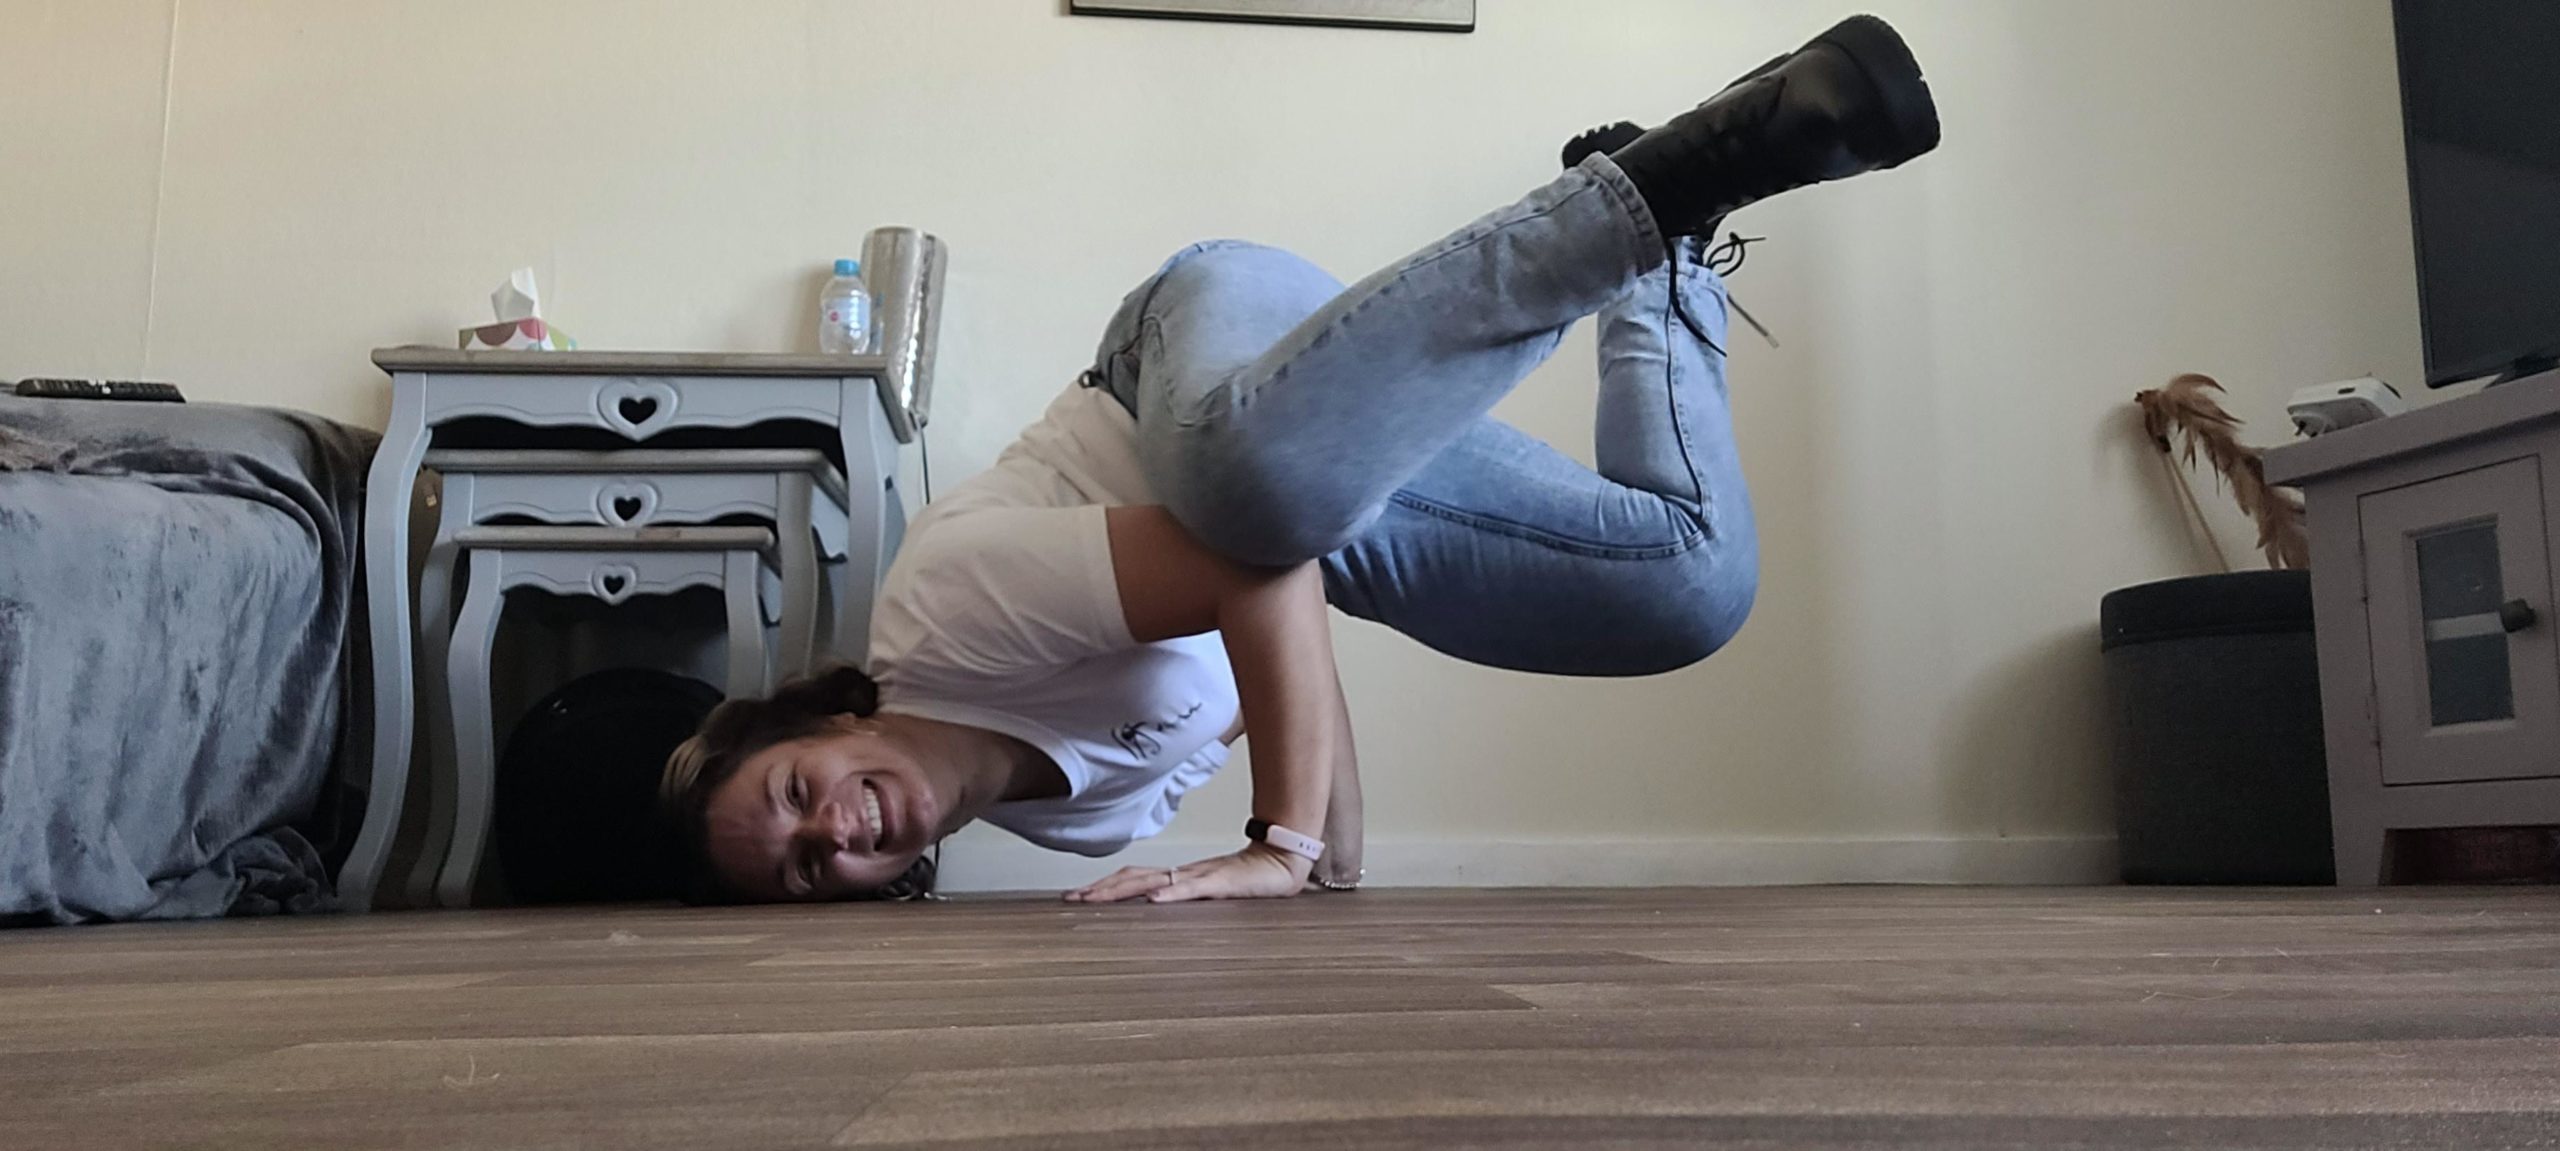 Starr Connor breakdancing